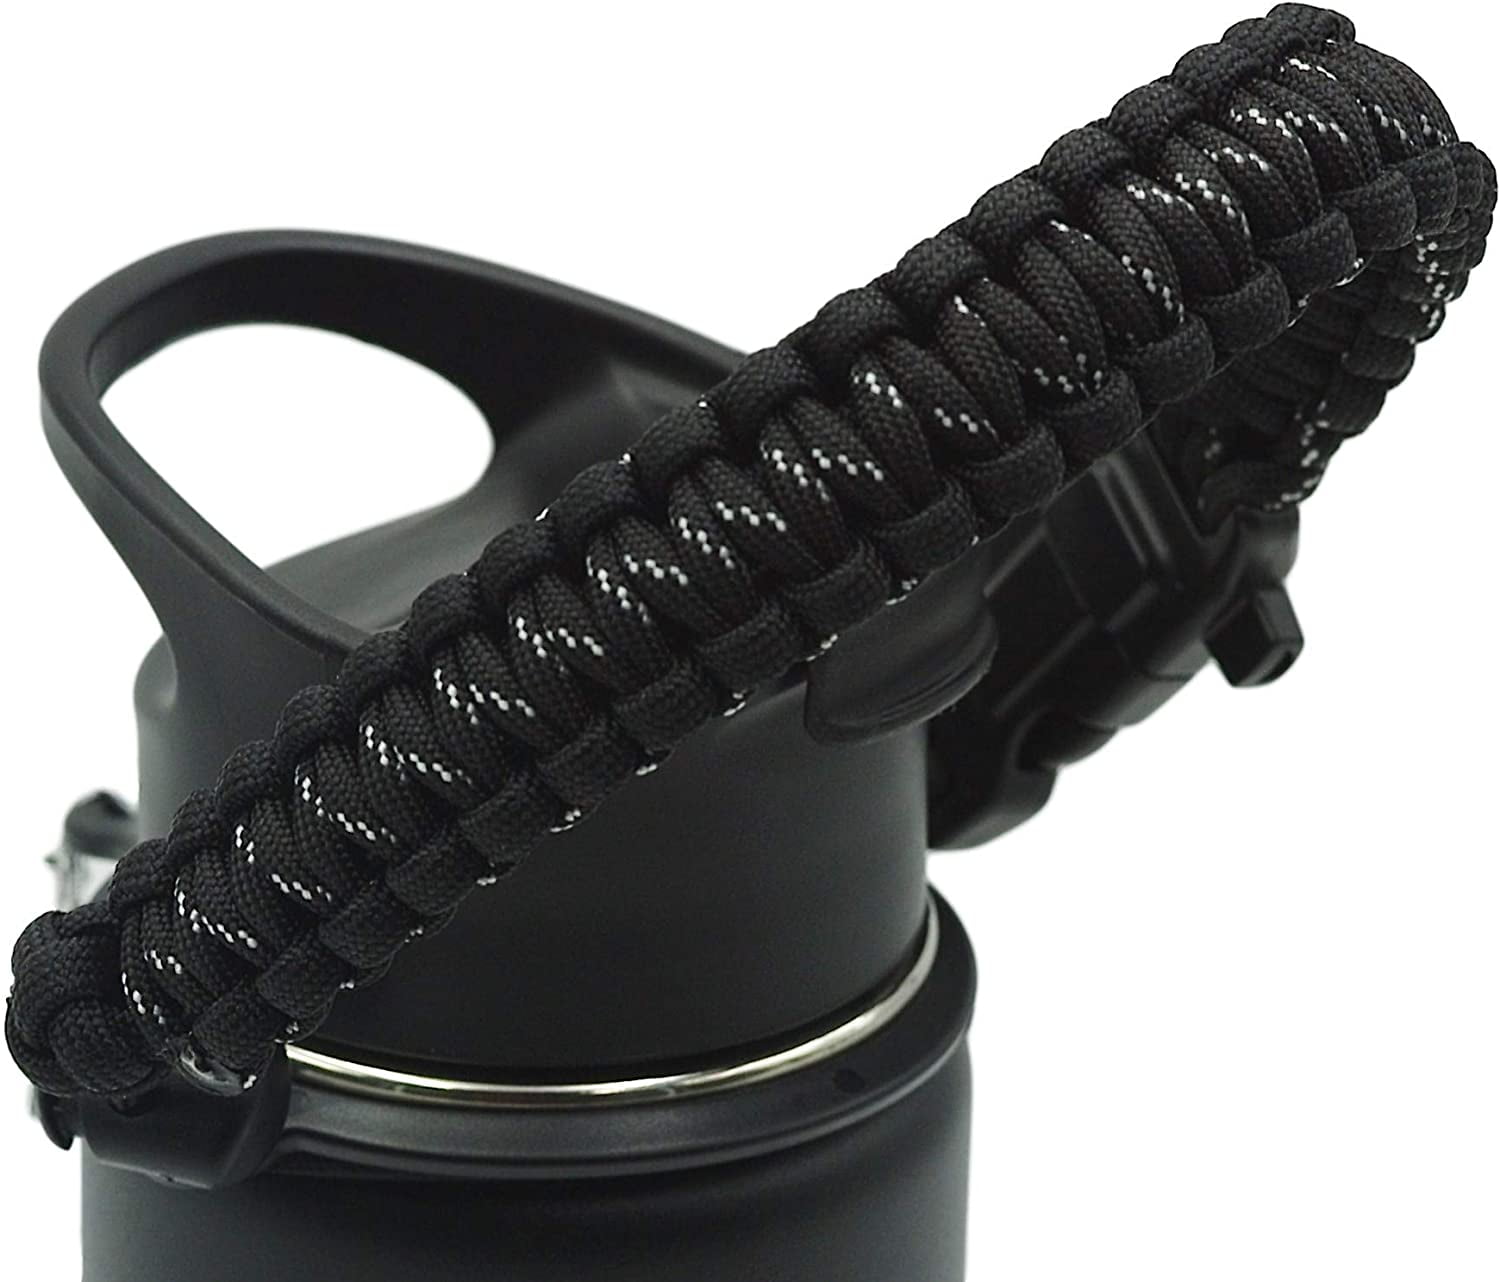  Miracredo Paracord Handle for New Hydro Flask 2.0 Wide Mouth  Water Bottle with Rubber Ring & Carabiner, Easy Carry Strap Holder for Hydro  Flask Water Bottle, Fit 12 oz to